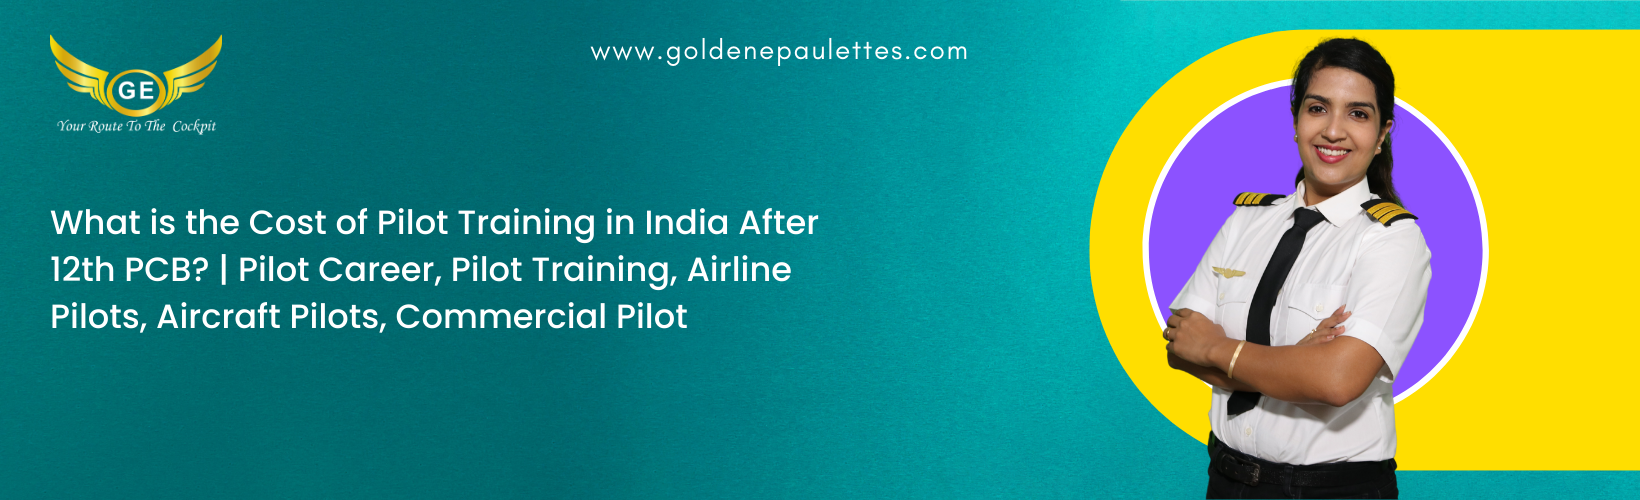 The Cost of Pilot Training in India